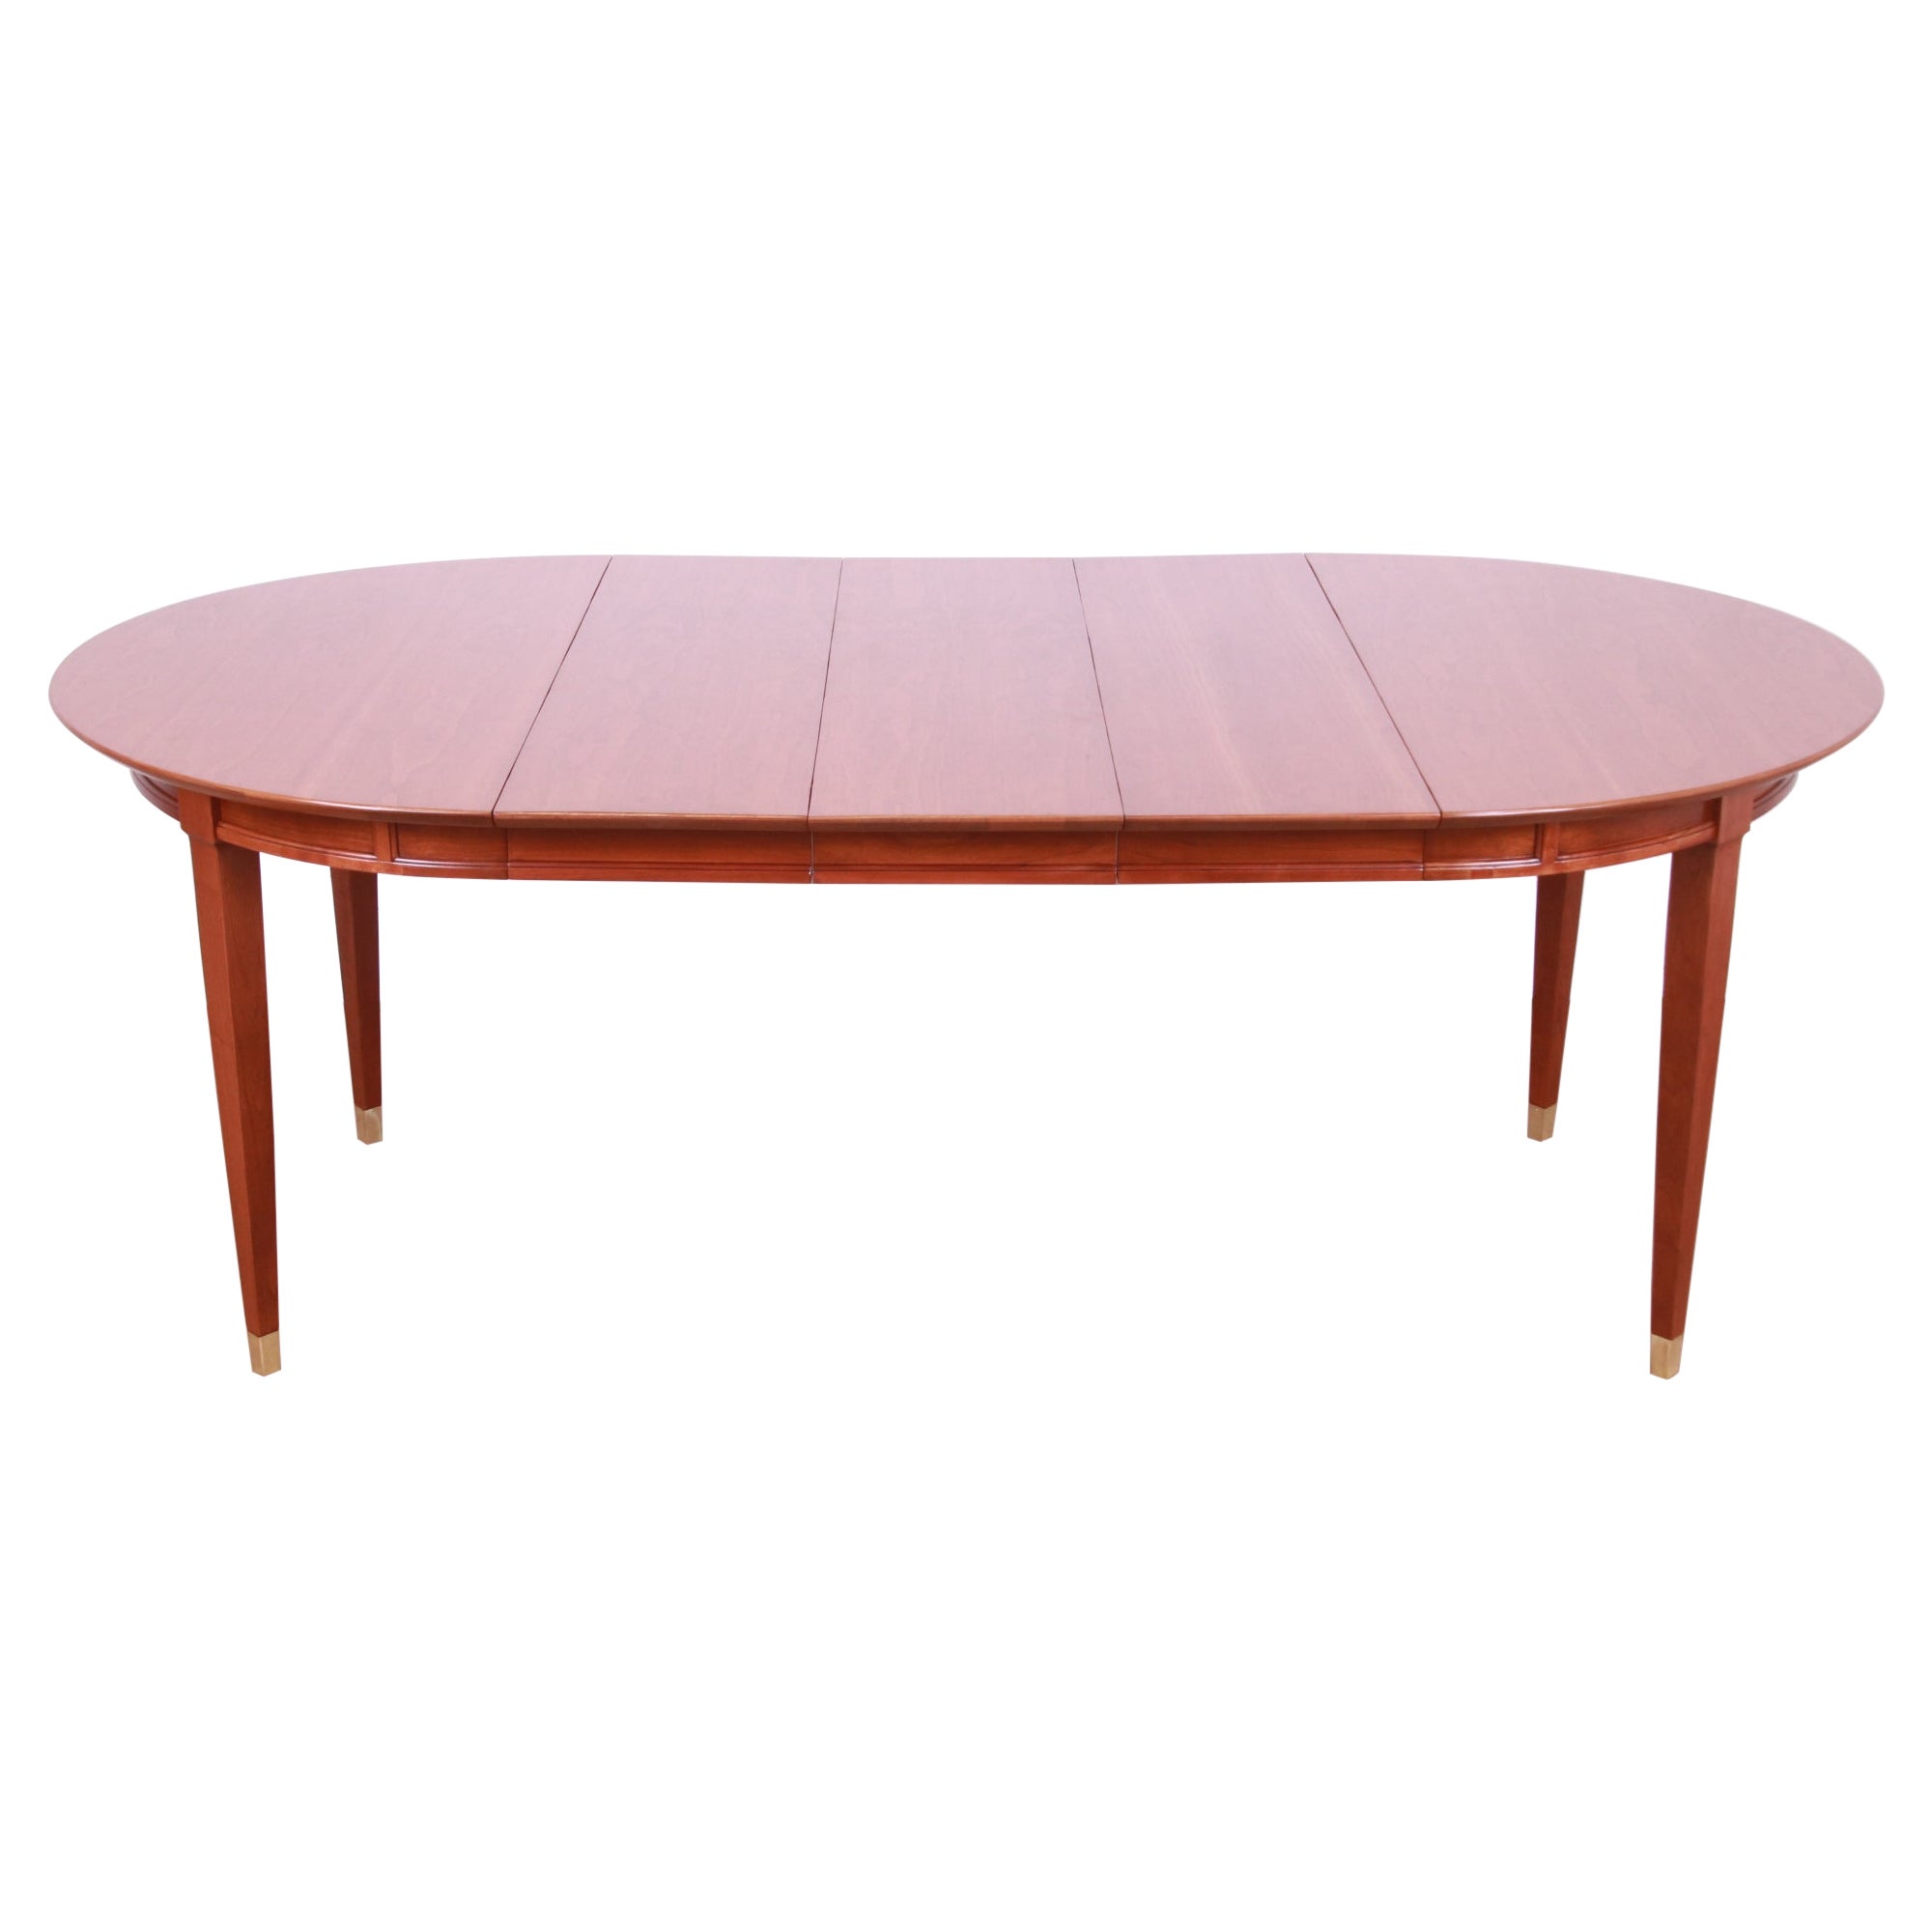 Mid-Century French Regency Cherry Wood Dining Table Attributed to Tomlinson